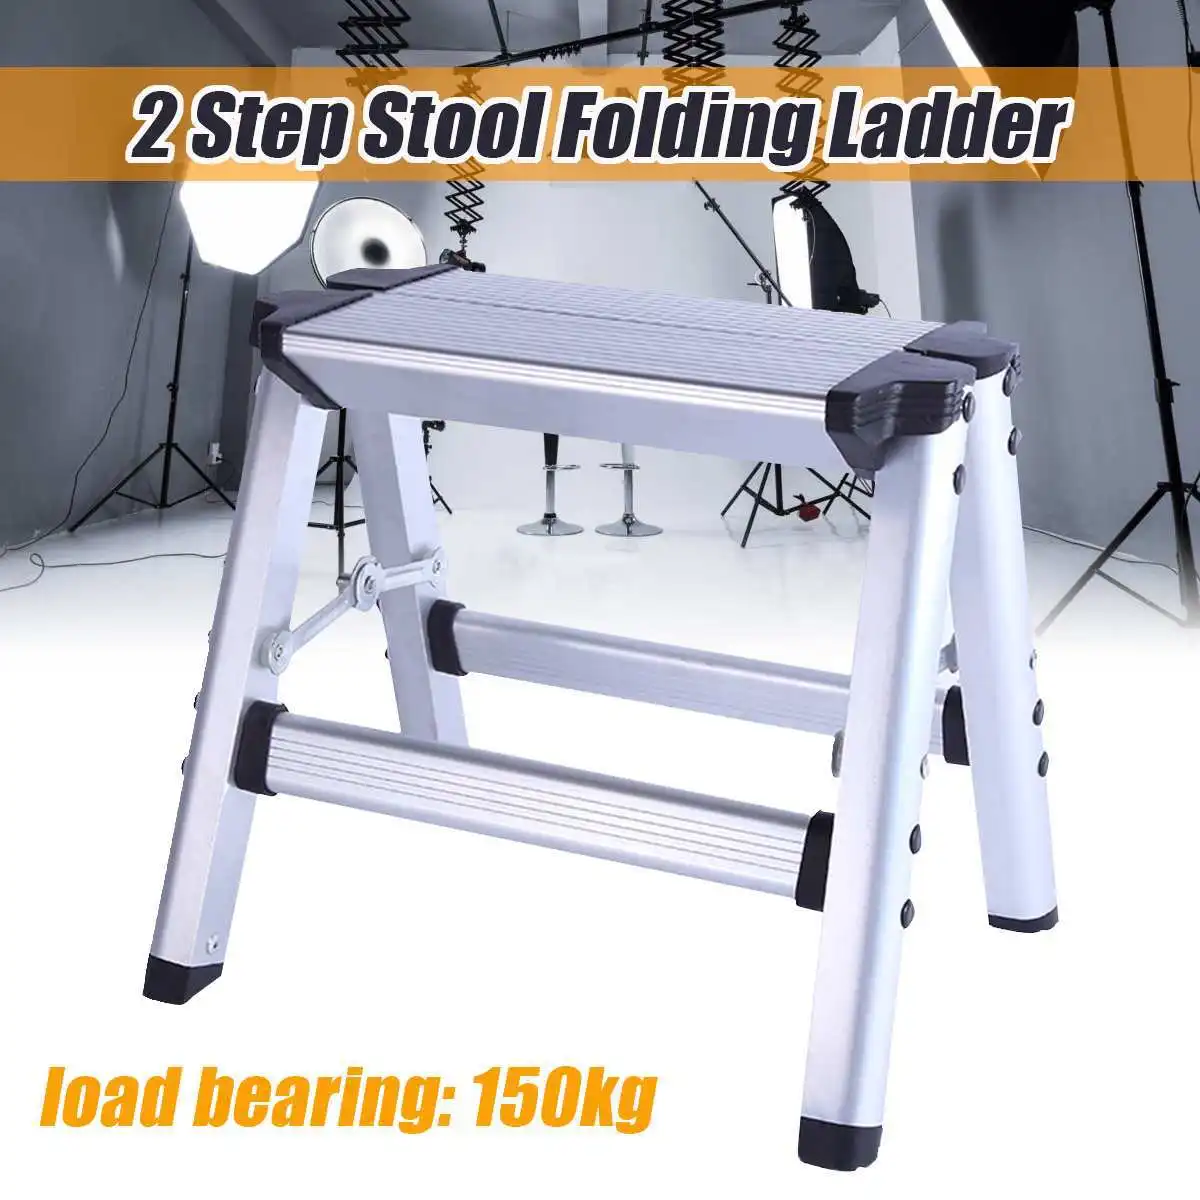 Aluminium Platform 2-Step Tool Folding Ladder Maximum 150KG Load Anti Slip Safety Double-sided with Thick Stairs